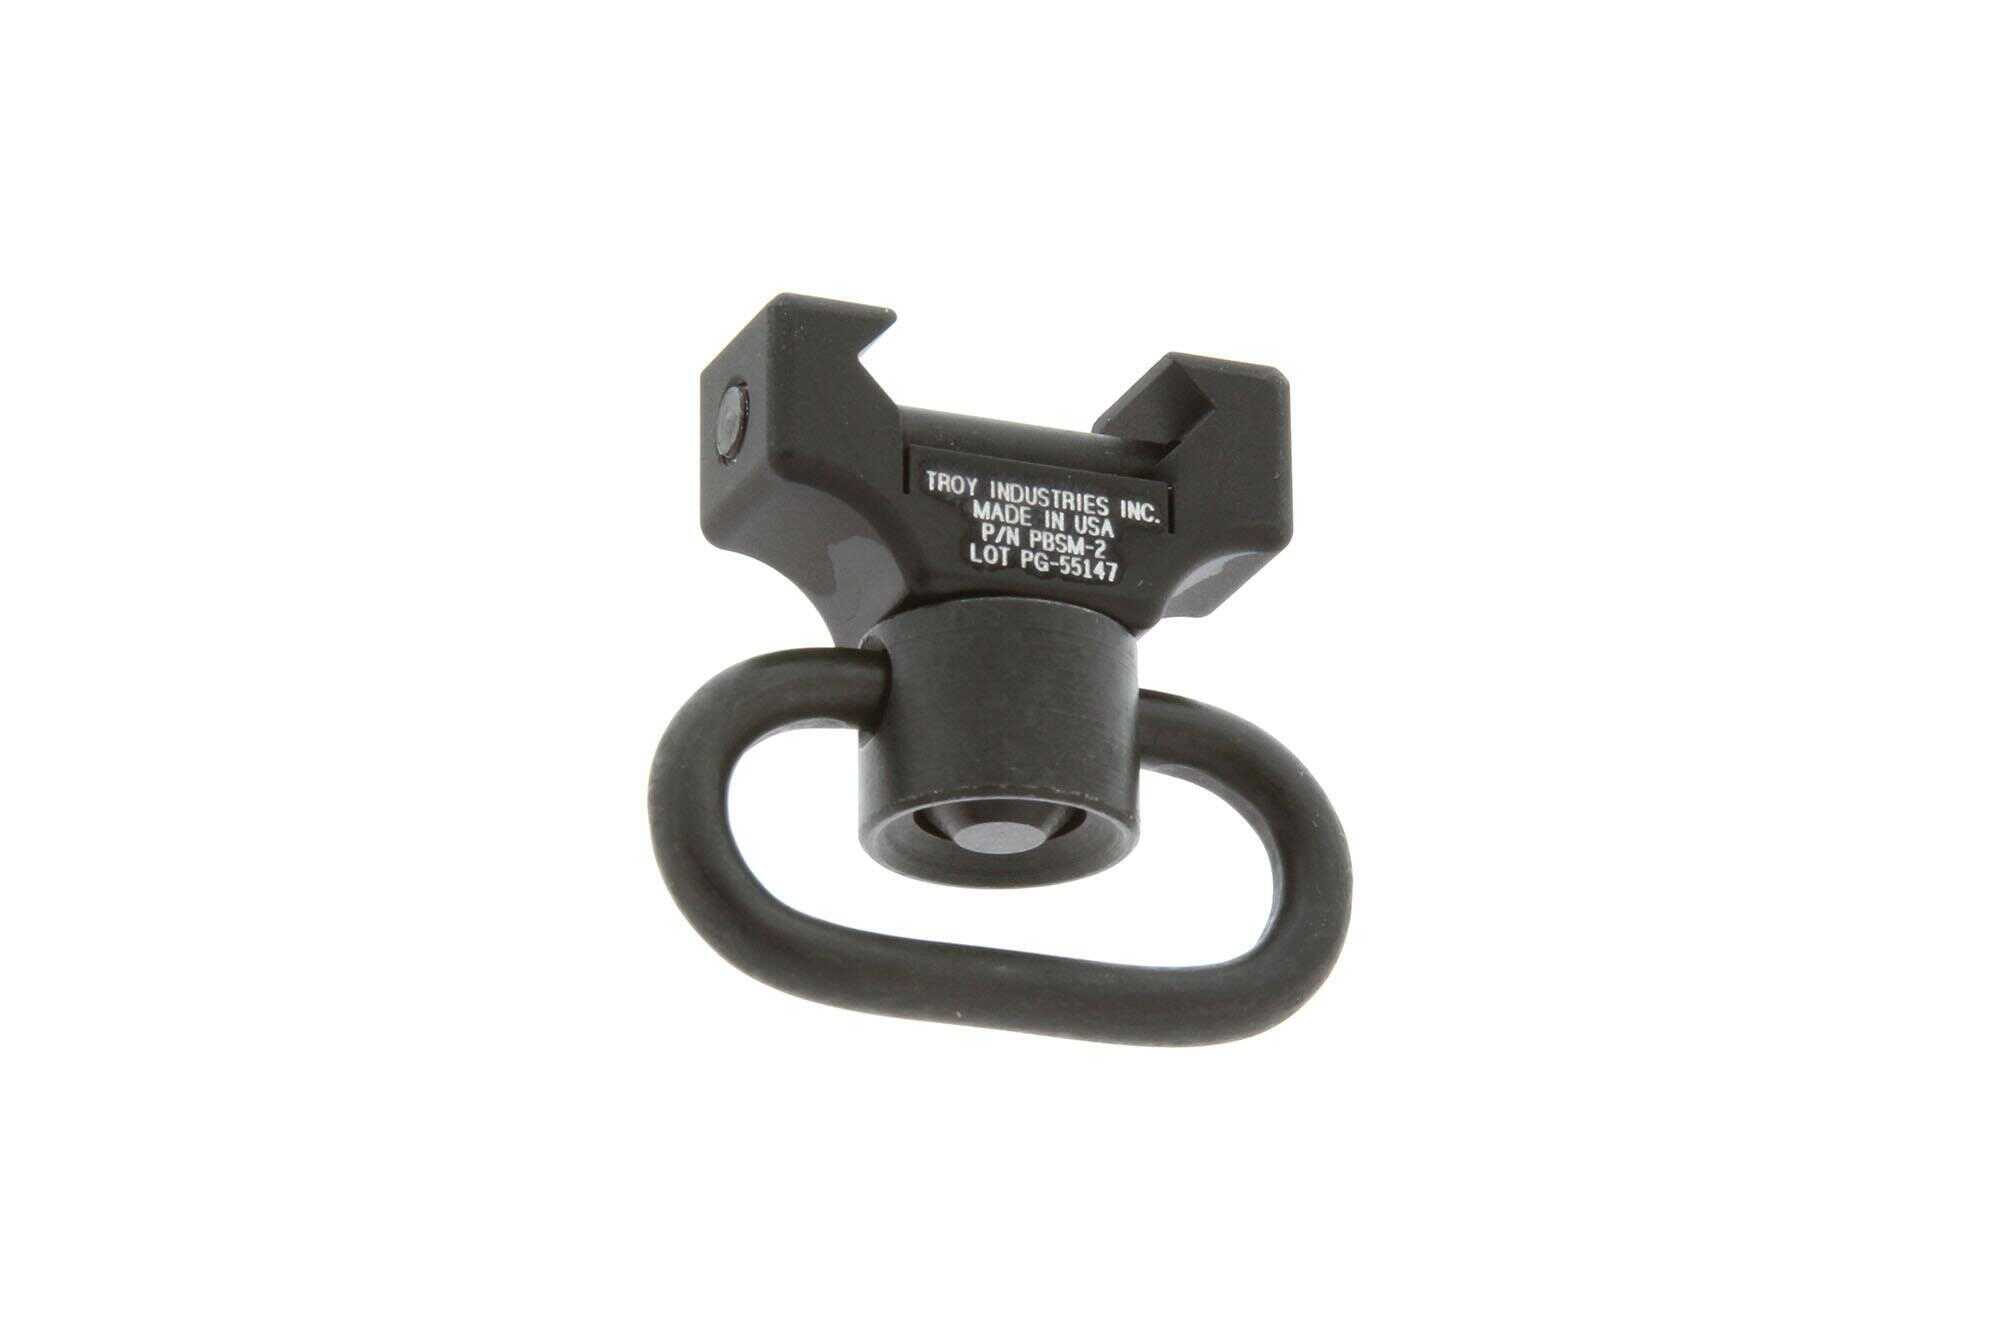 Troy Industries Q.D 360 Push Button Rail Mount with Swivel 